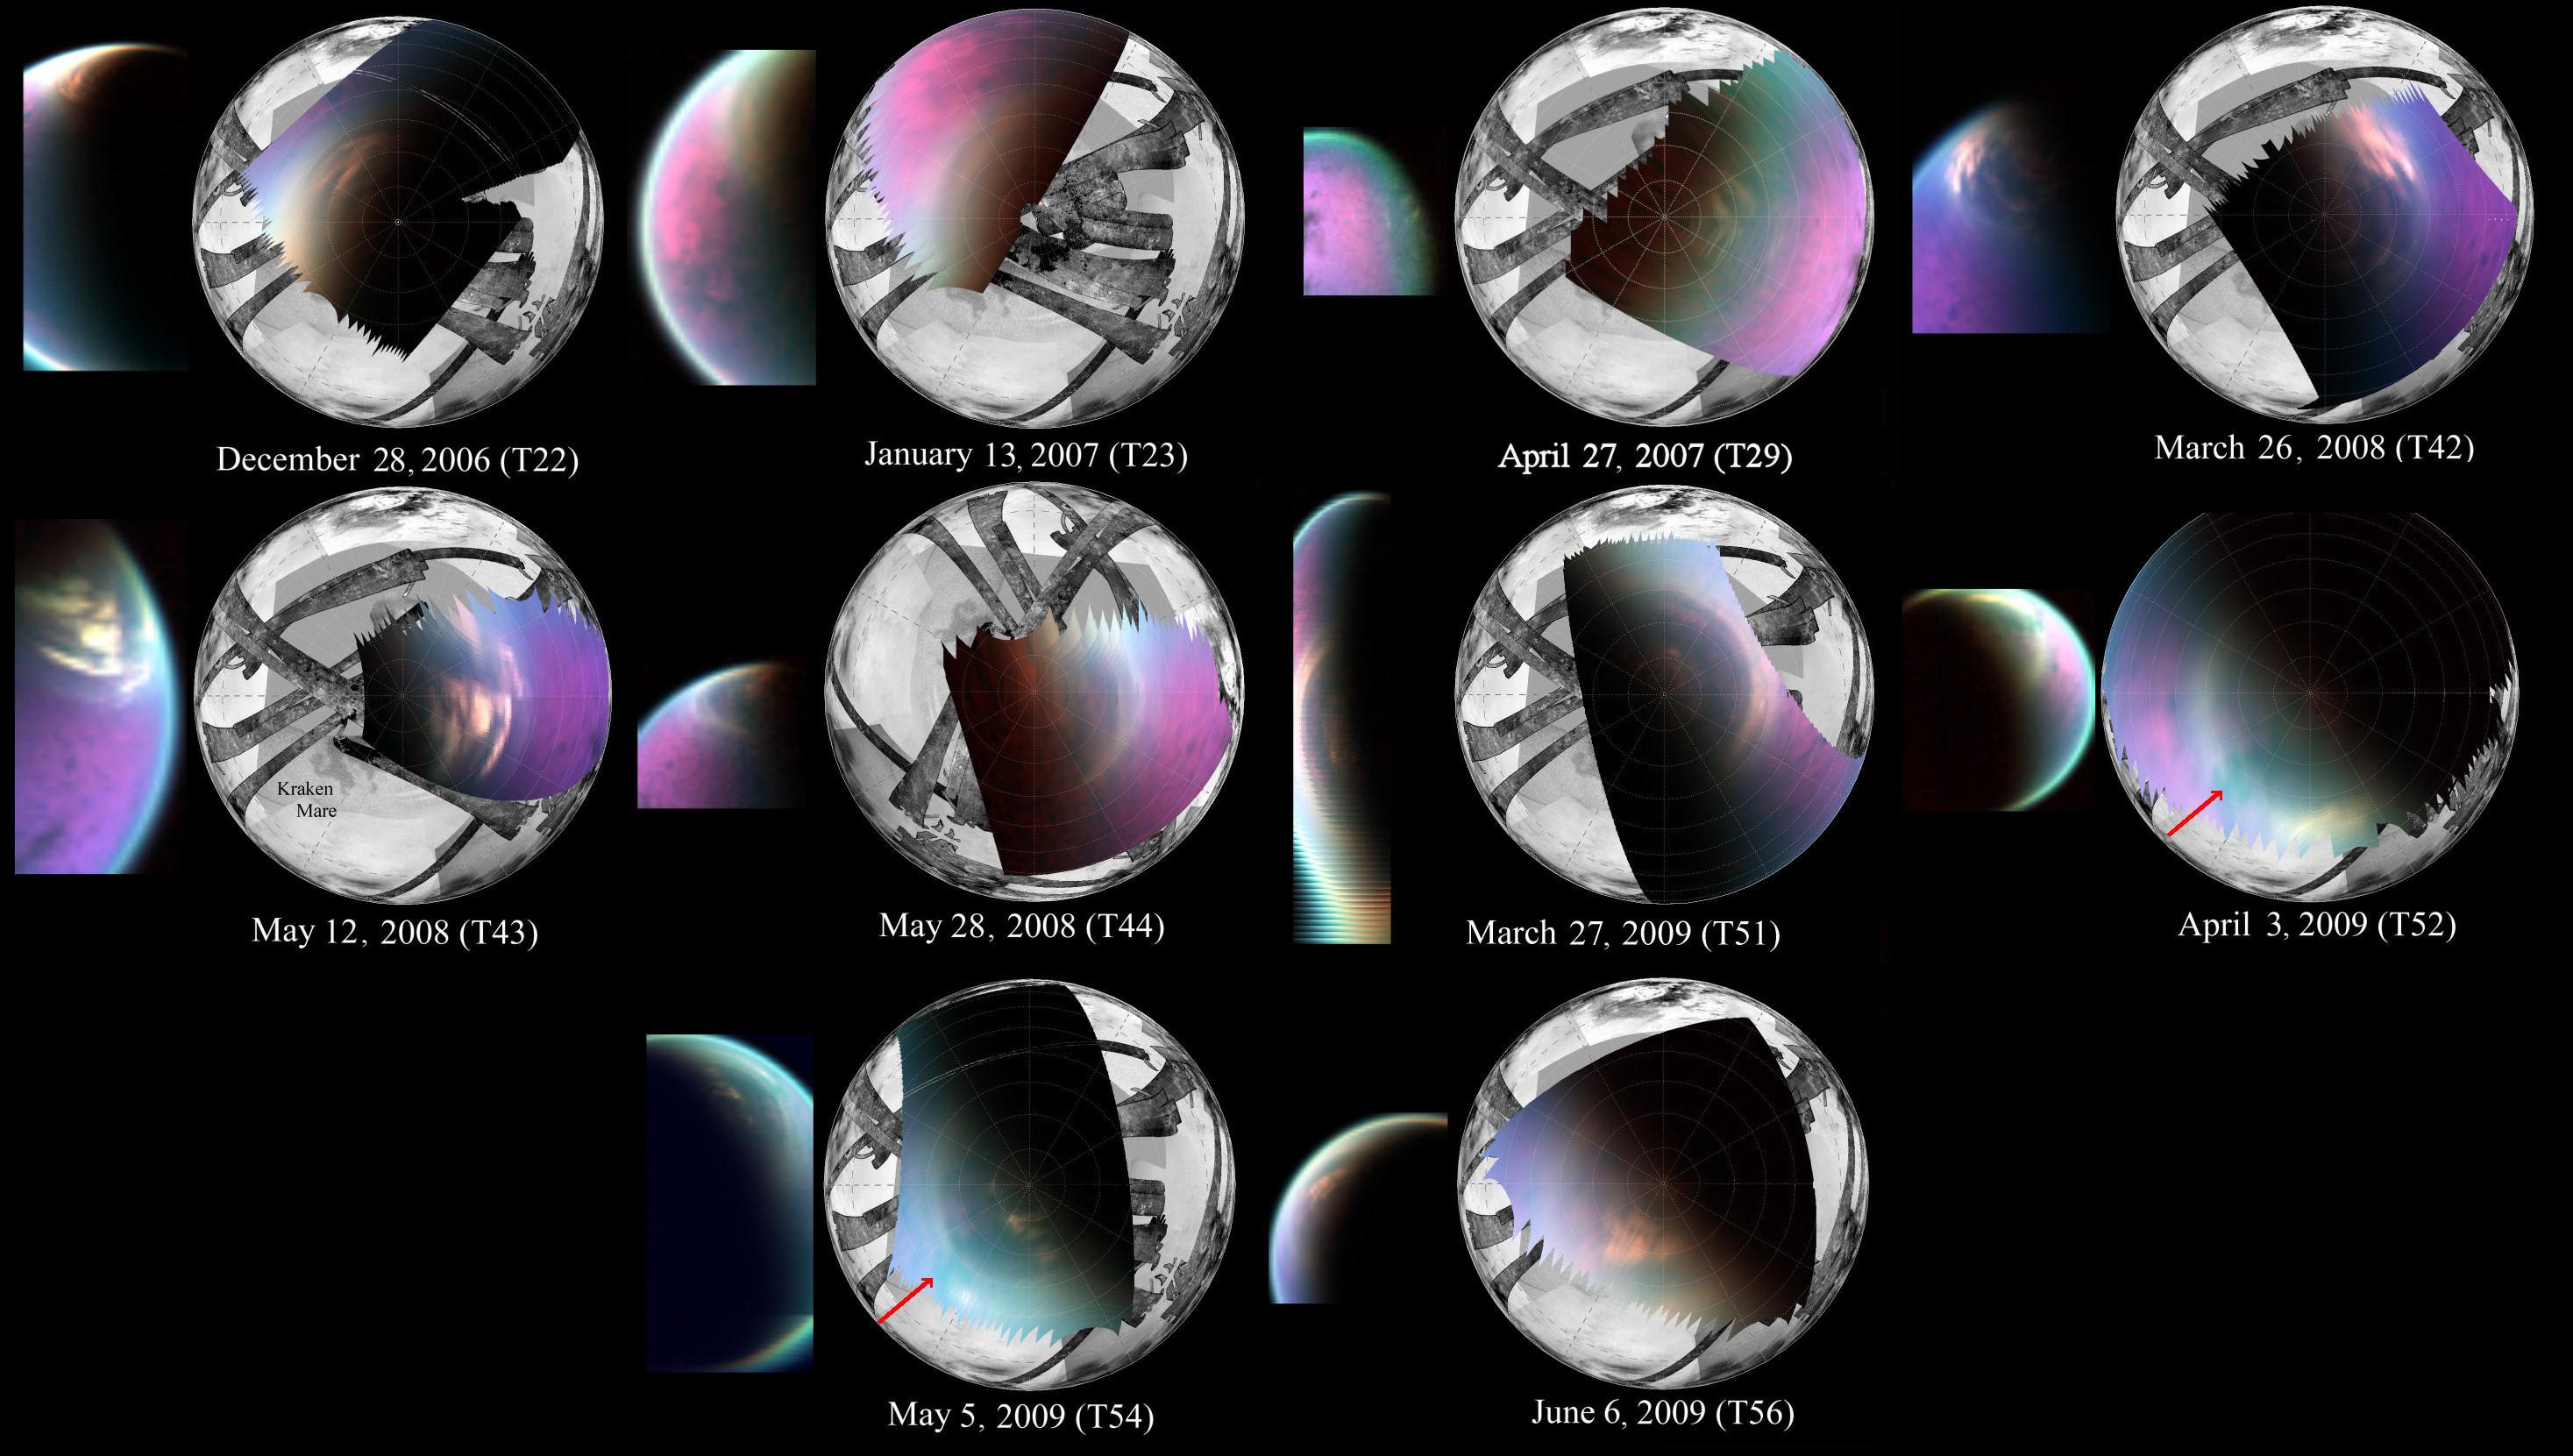 This series of images obtained by NASA’s Cassini spacecraft shows several views of the north polar cloud covering Saturn’s moon Titan.